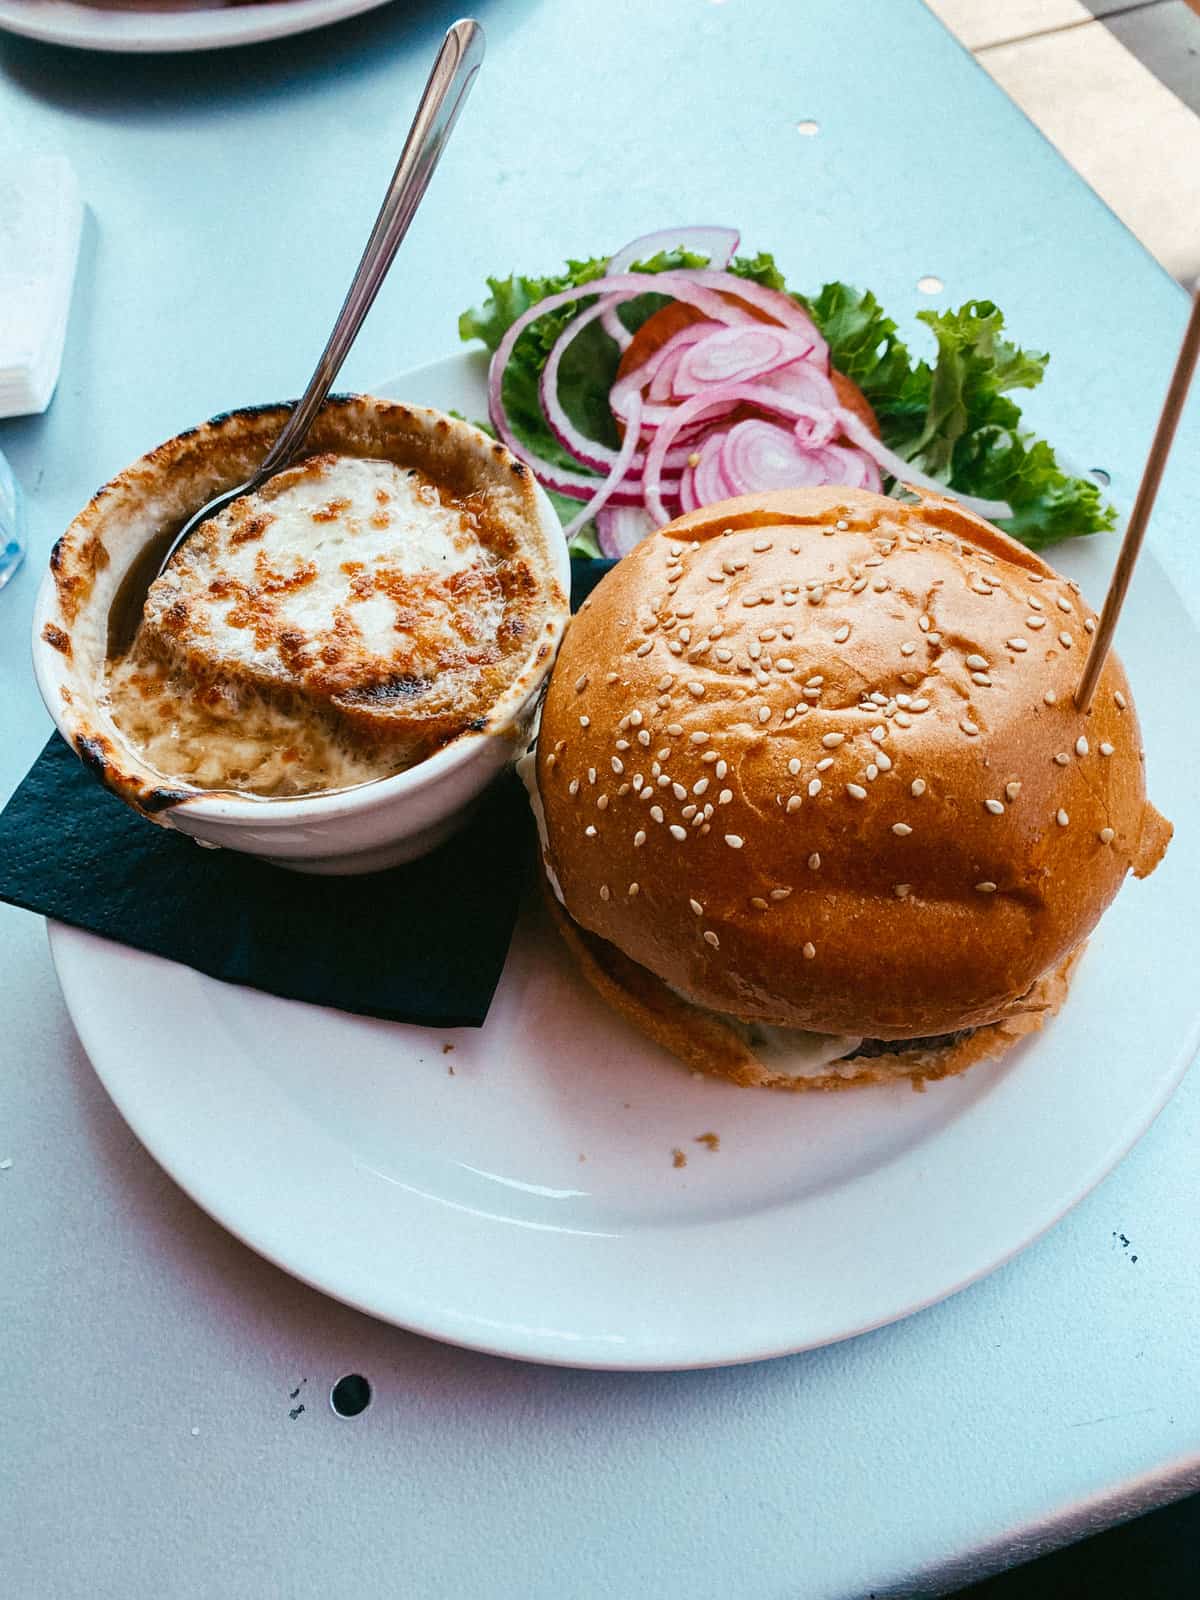 A burger and french onion soup.